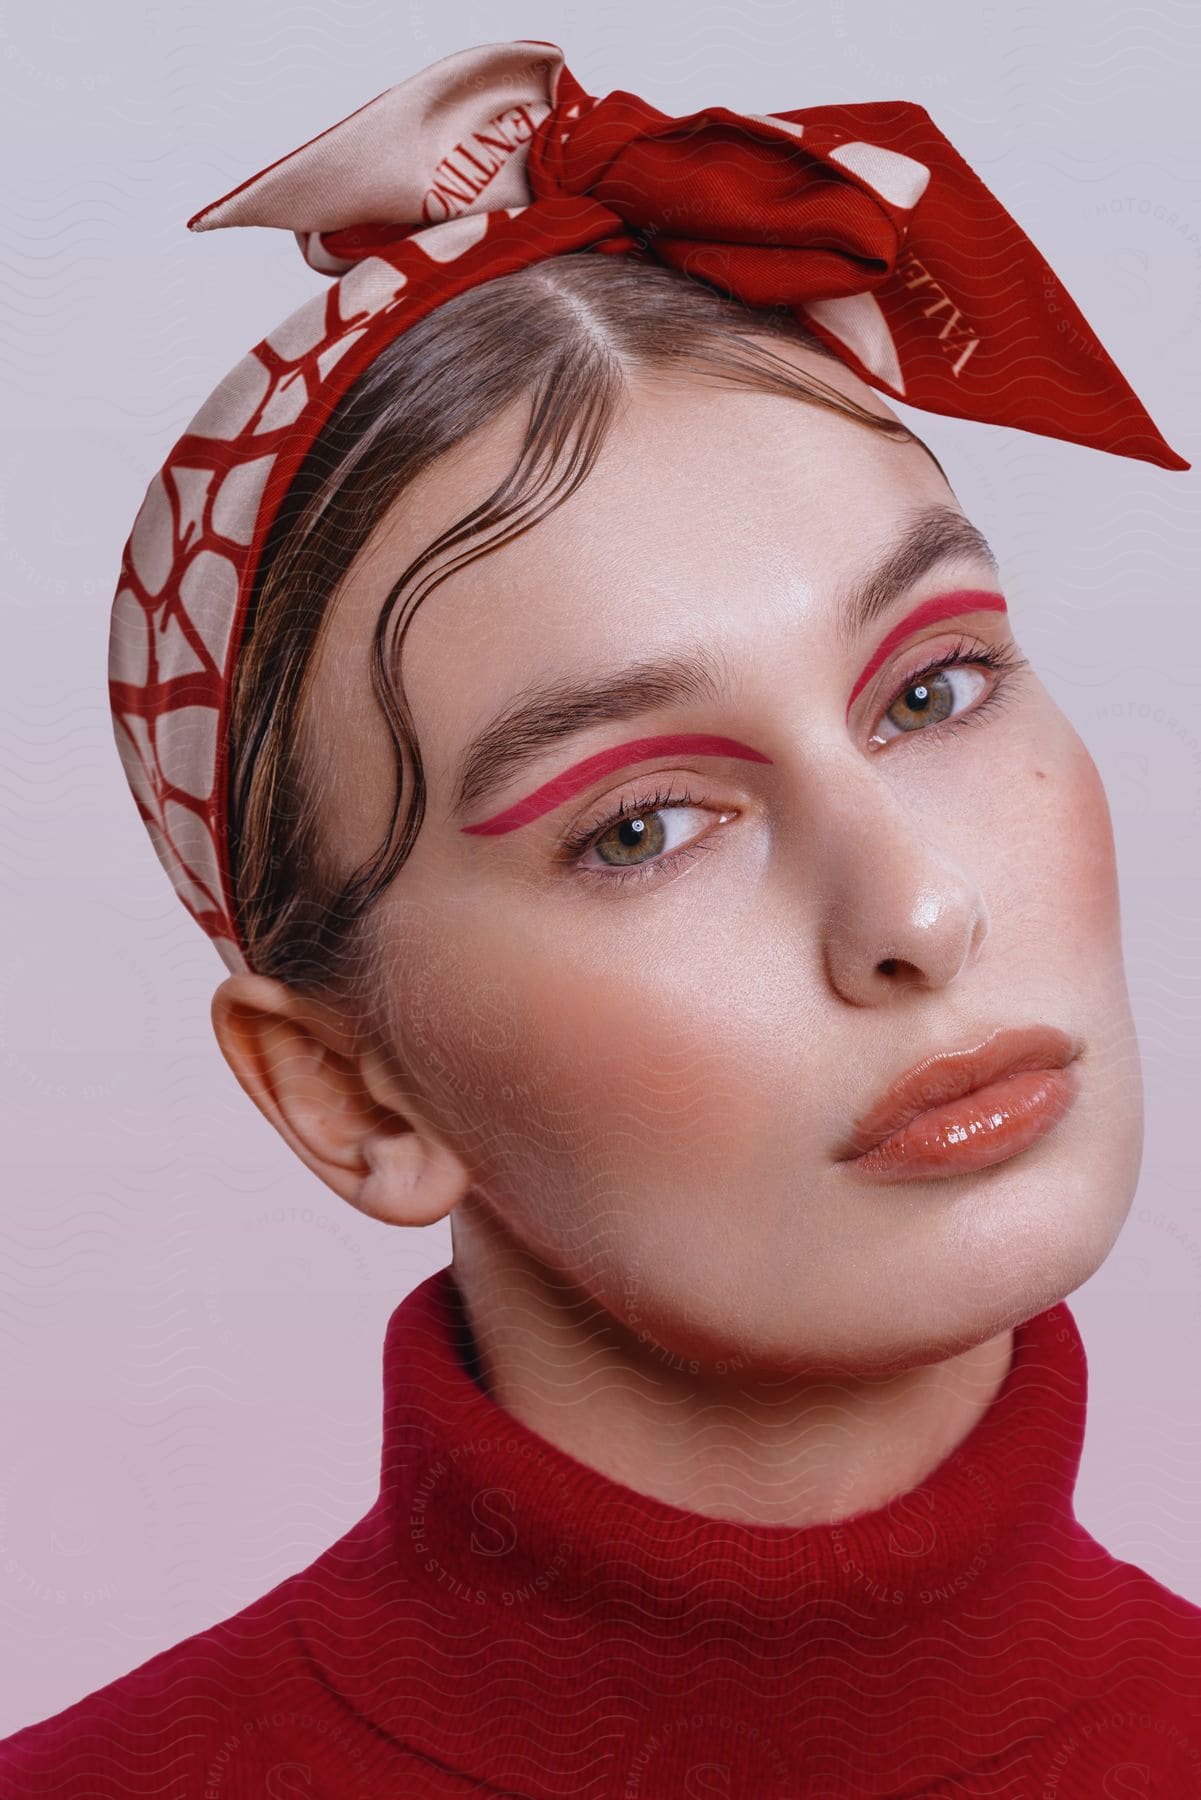 A woman with red makeup, headband and turtleneck on as she looks forward her lips pursed.